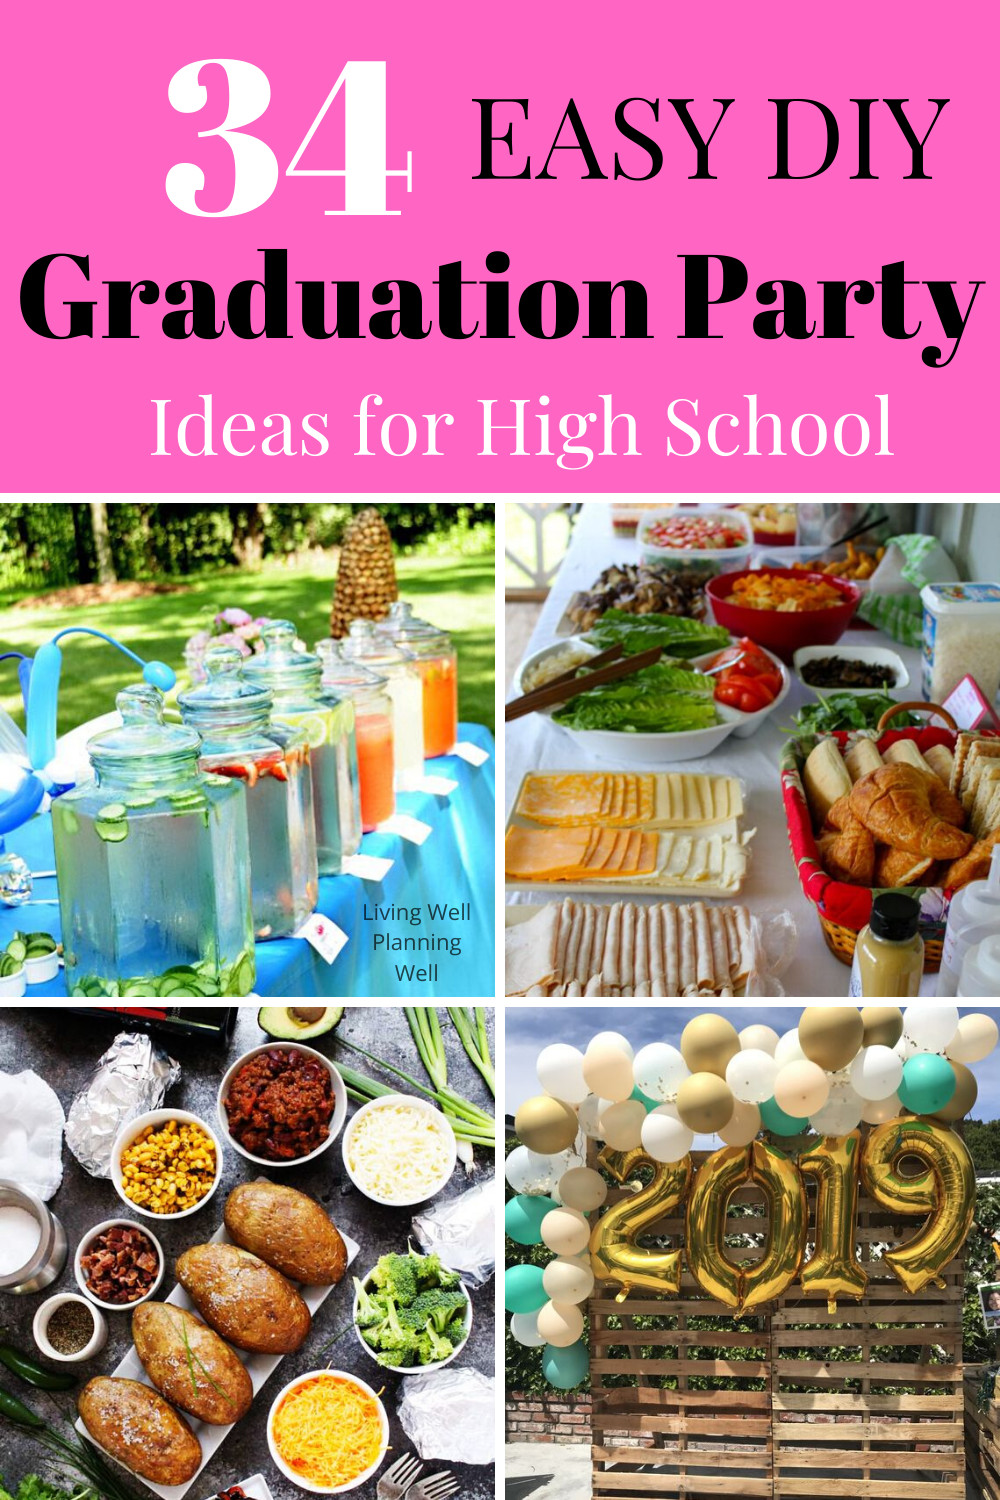 Graduation Party Food Ideas On A Budget
 Pin on Graduation Party Food Ideas